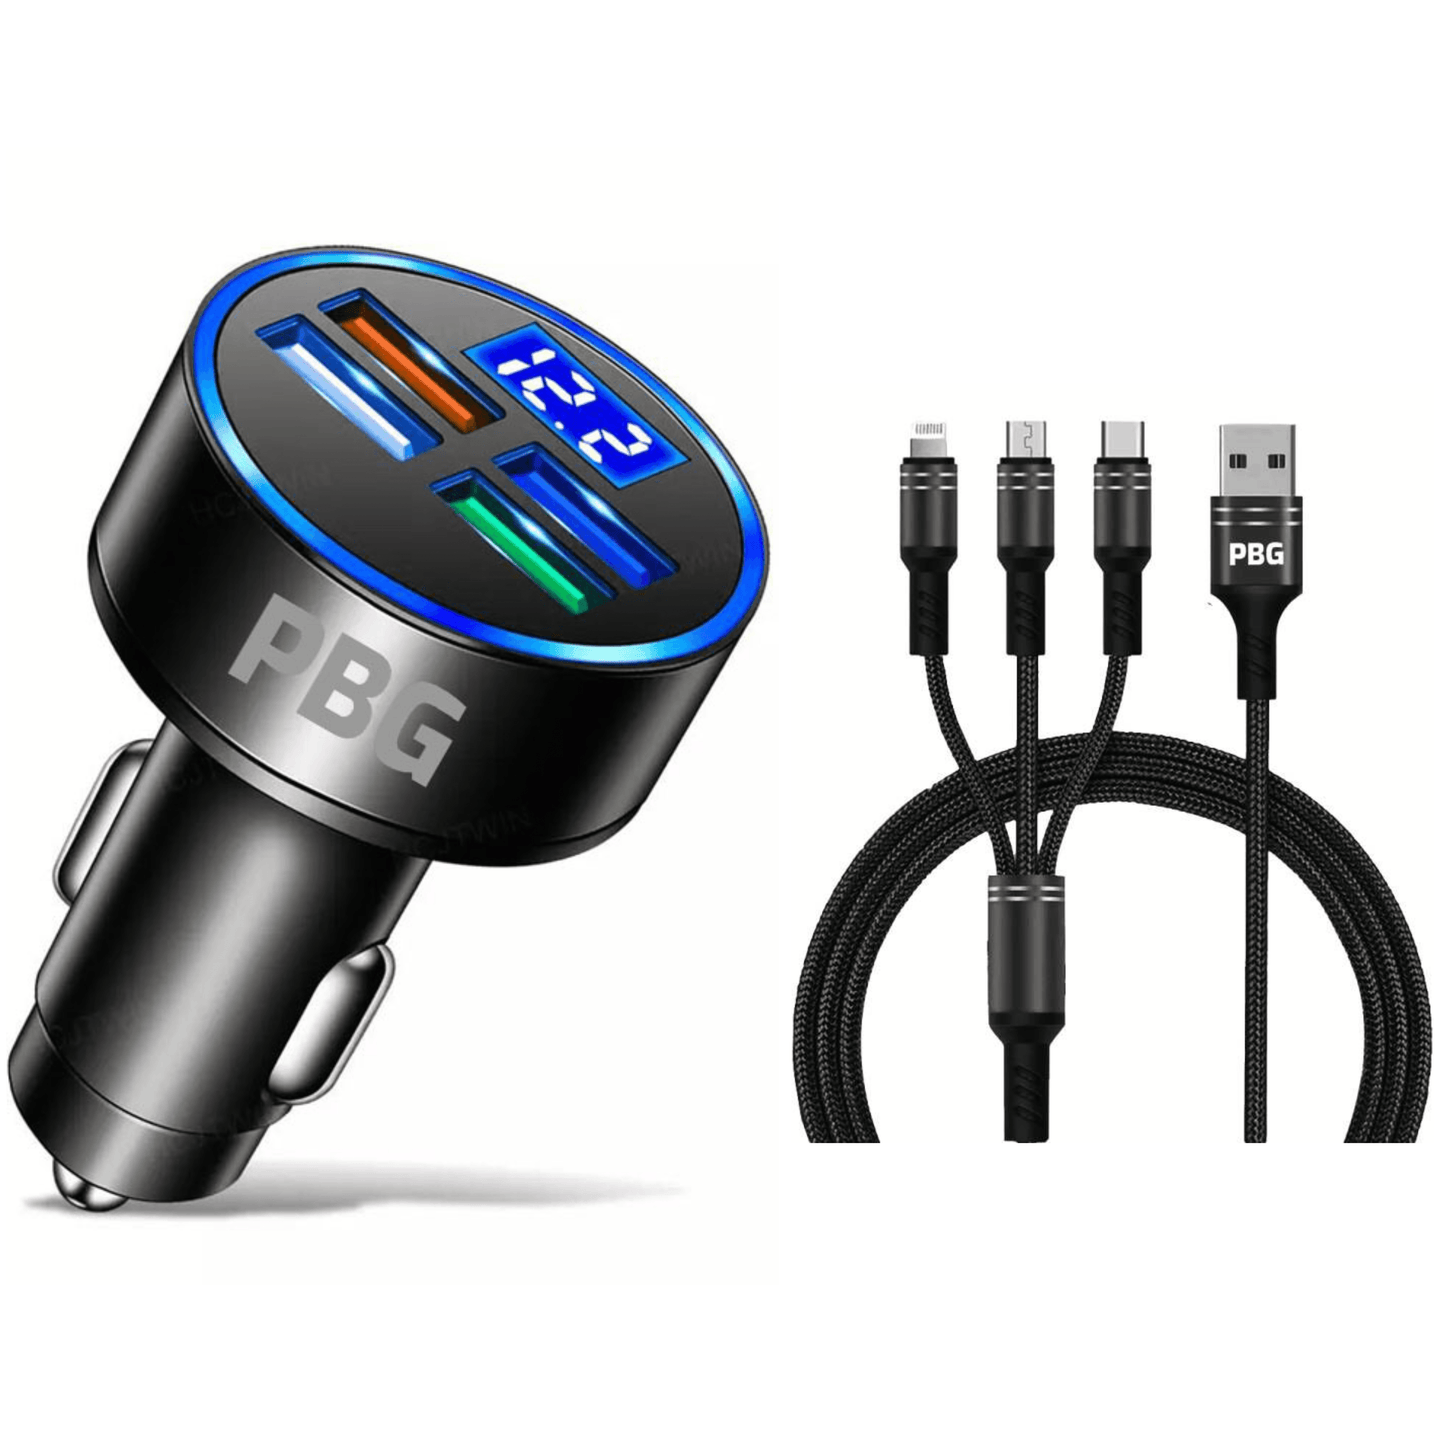 PBG LED 4 Port Car Charger Voltage Display and 3 in 1 Cable Bundle - PremiumBrandGoods